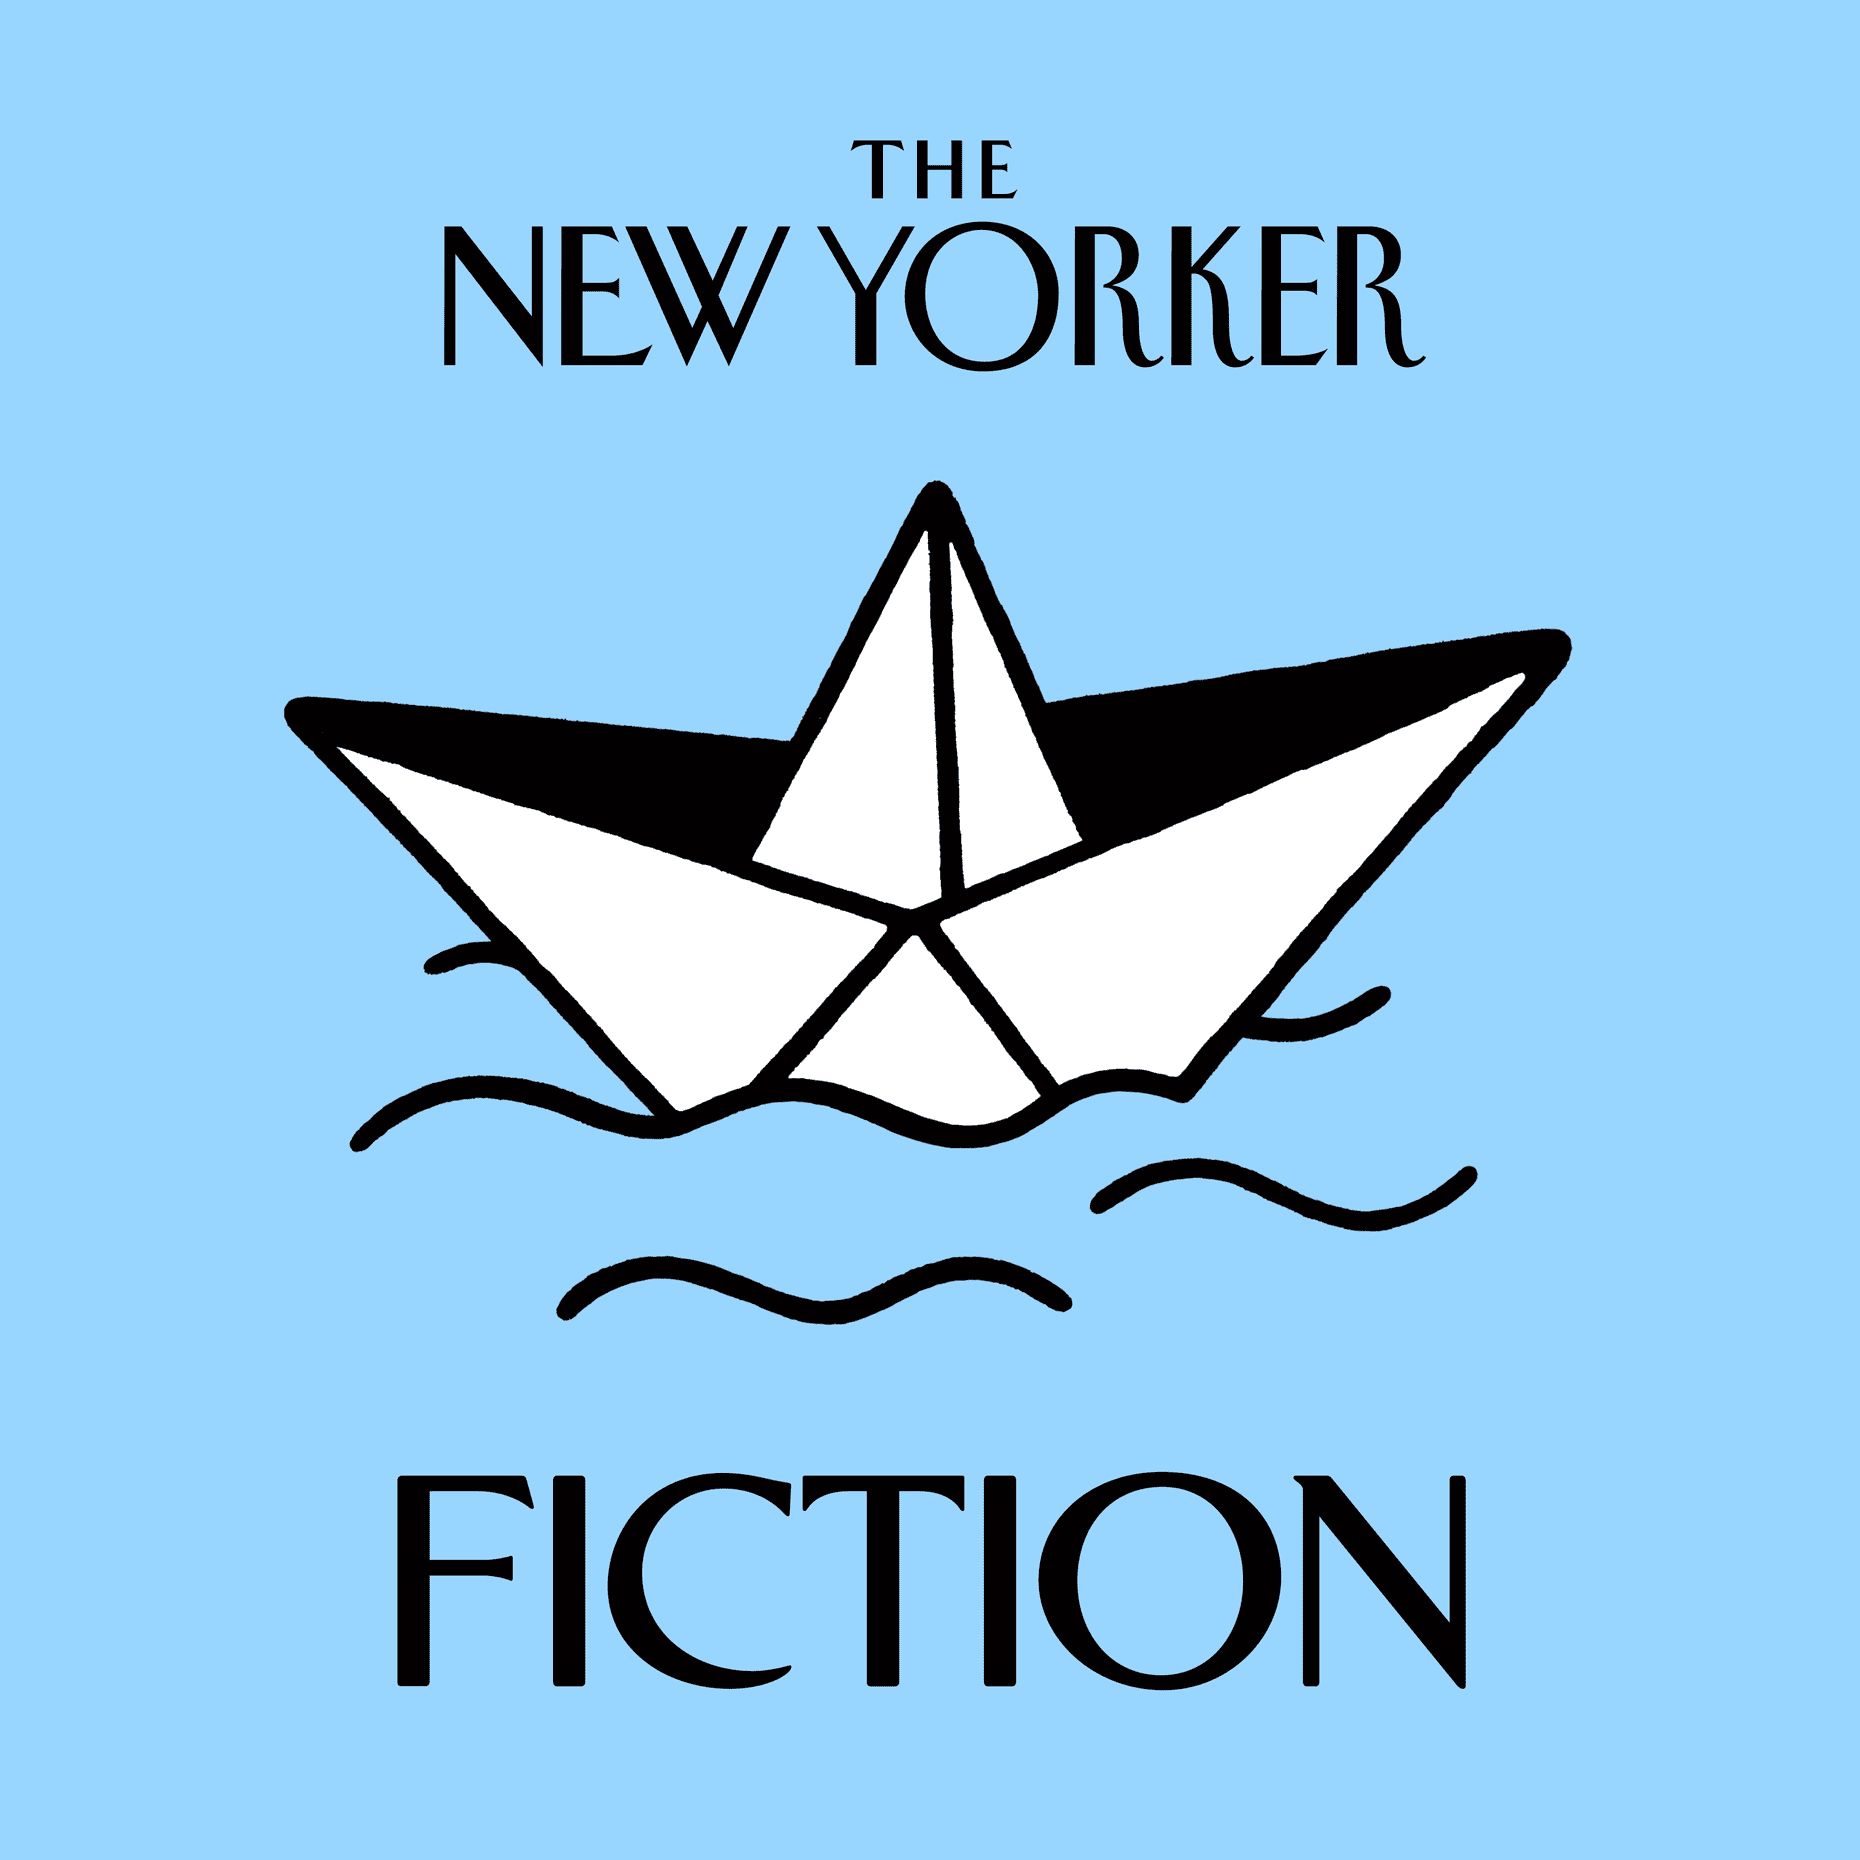 The New Yorker: Fiction podcast